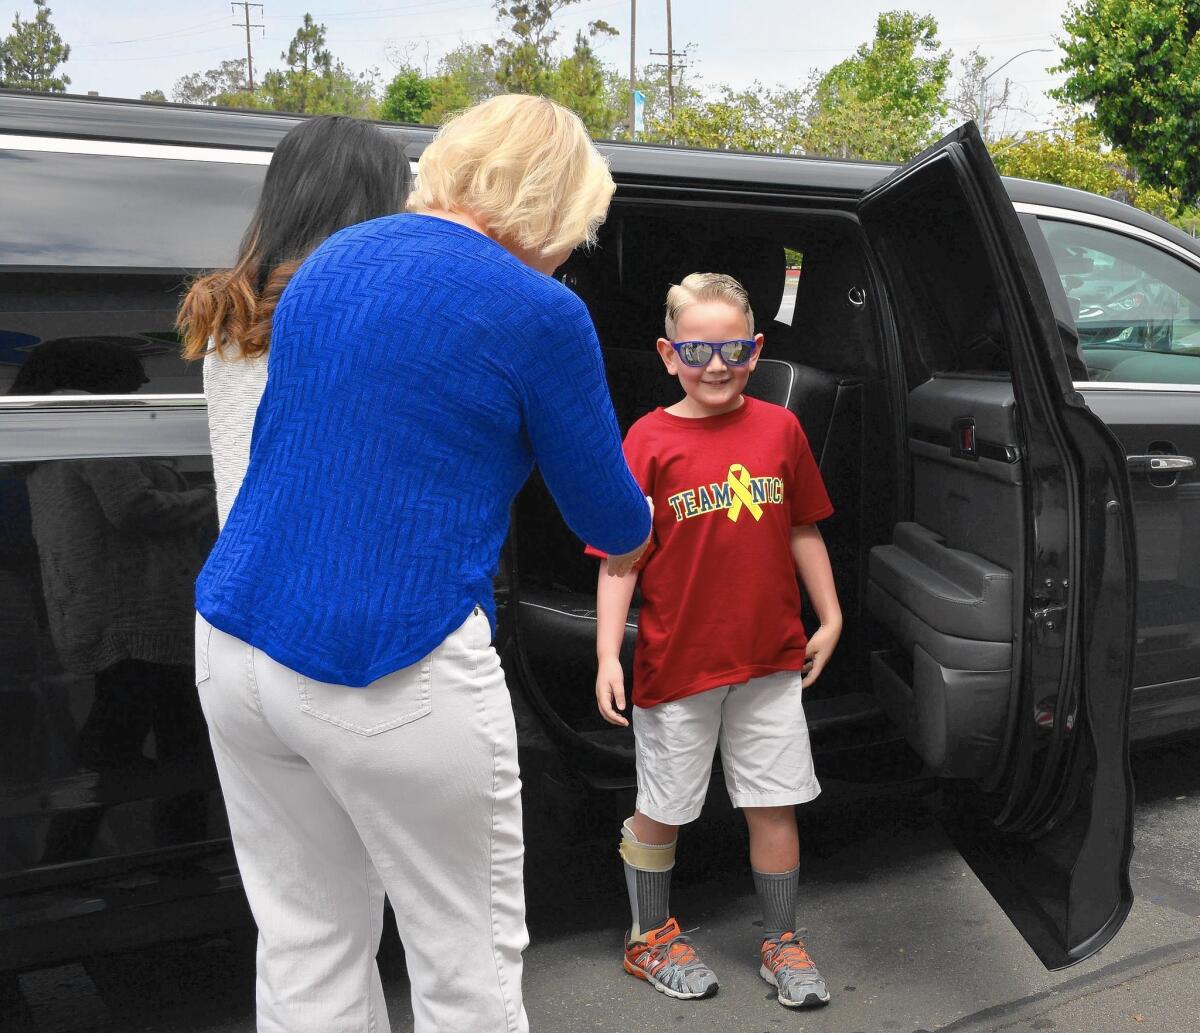 Nico, a Huntington Beach native who has bone cancer, arrives by limousine Friday at his eighth-birthday celebration at Toys R Us in Huntington Beach, where he learned his wish to visit Legoland would be granted by Make-A-Wish.